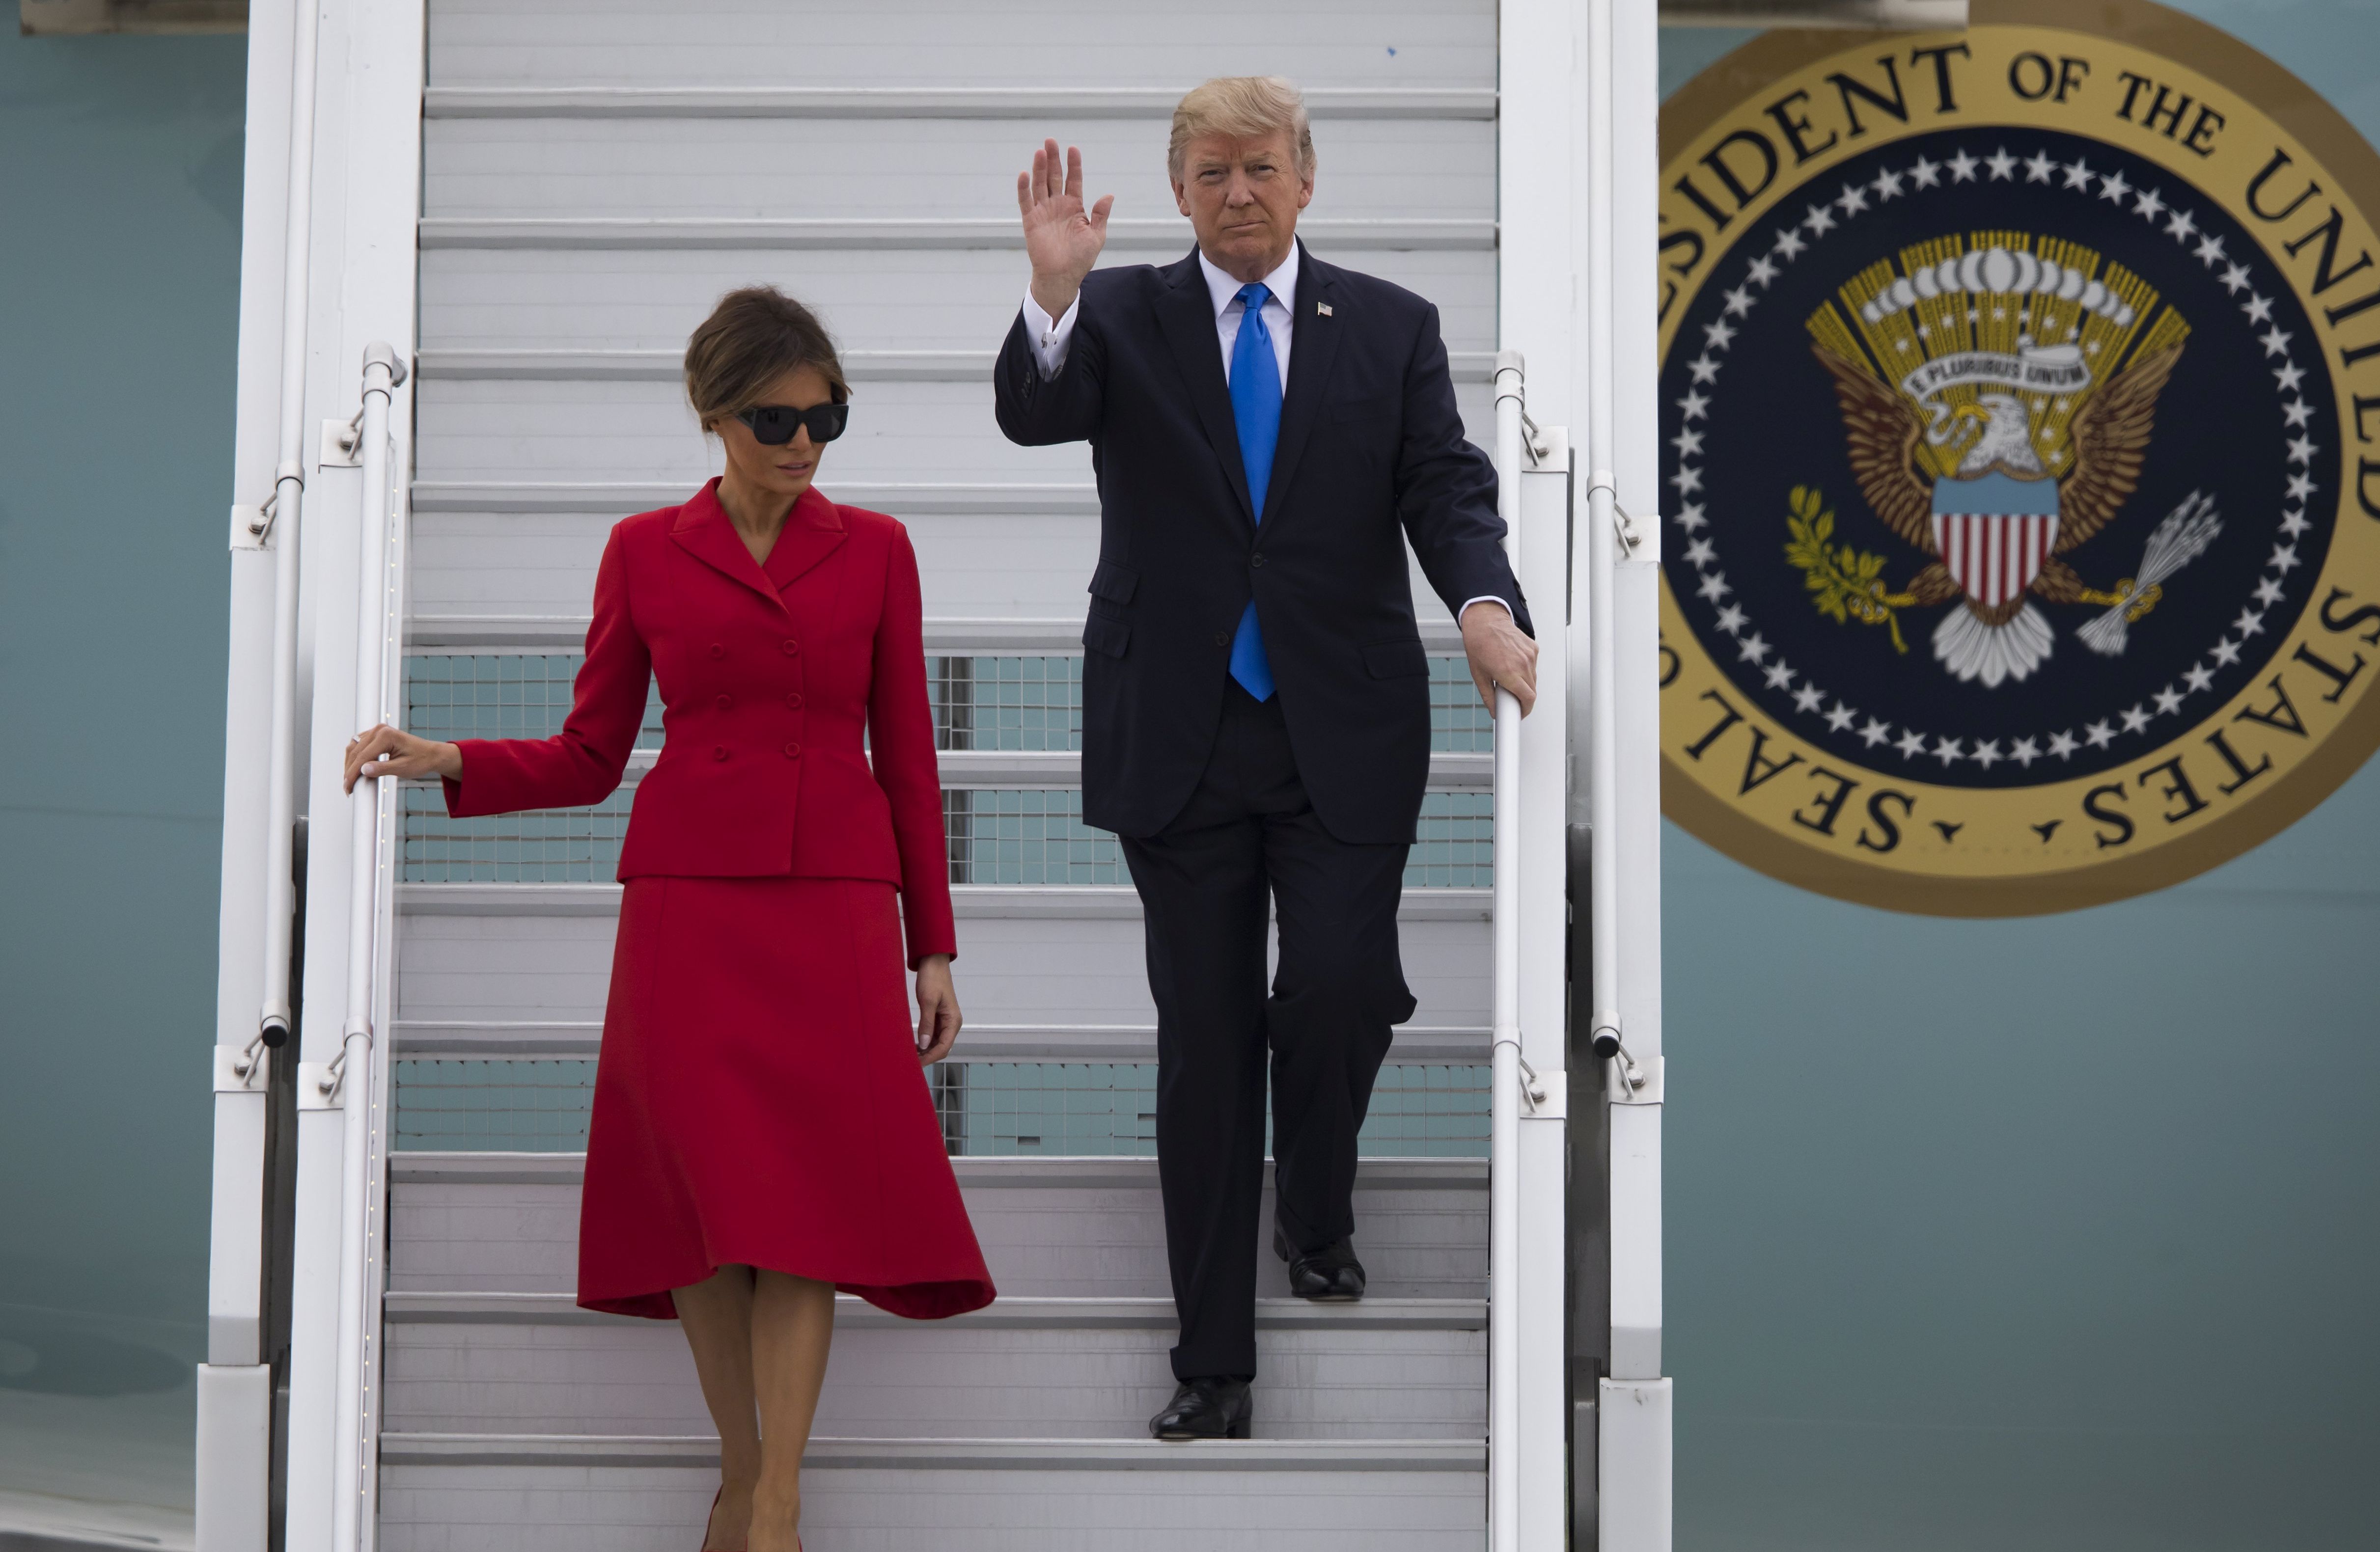 epa06084137 US President Donald J. Trump (R) and his wife Melania disembark Air Force One at Orly airport in Orly, near Paris, France, 13 July 2017. Trump is on a two-day visit in Paris.  EPA/IAN LANGSDON